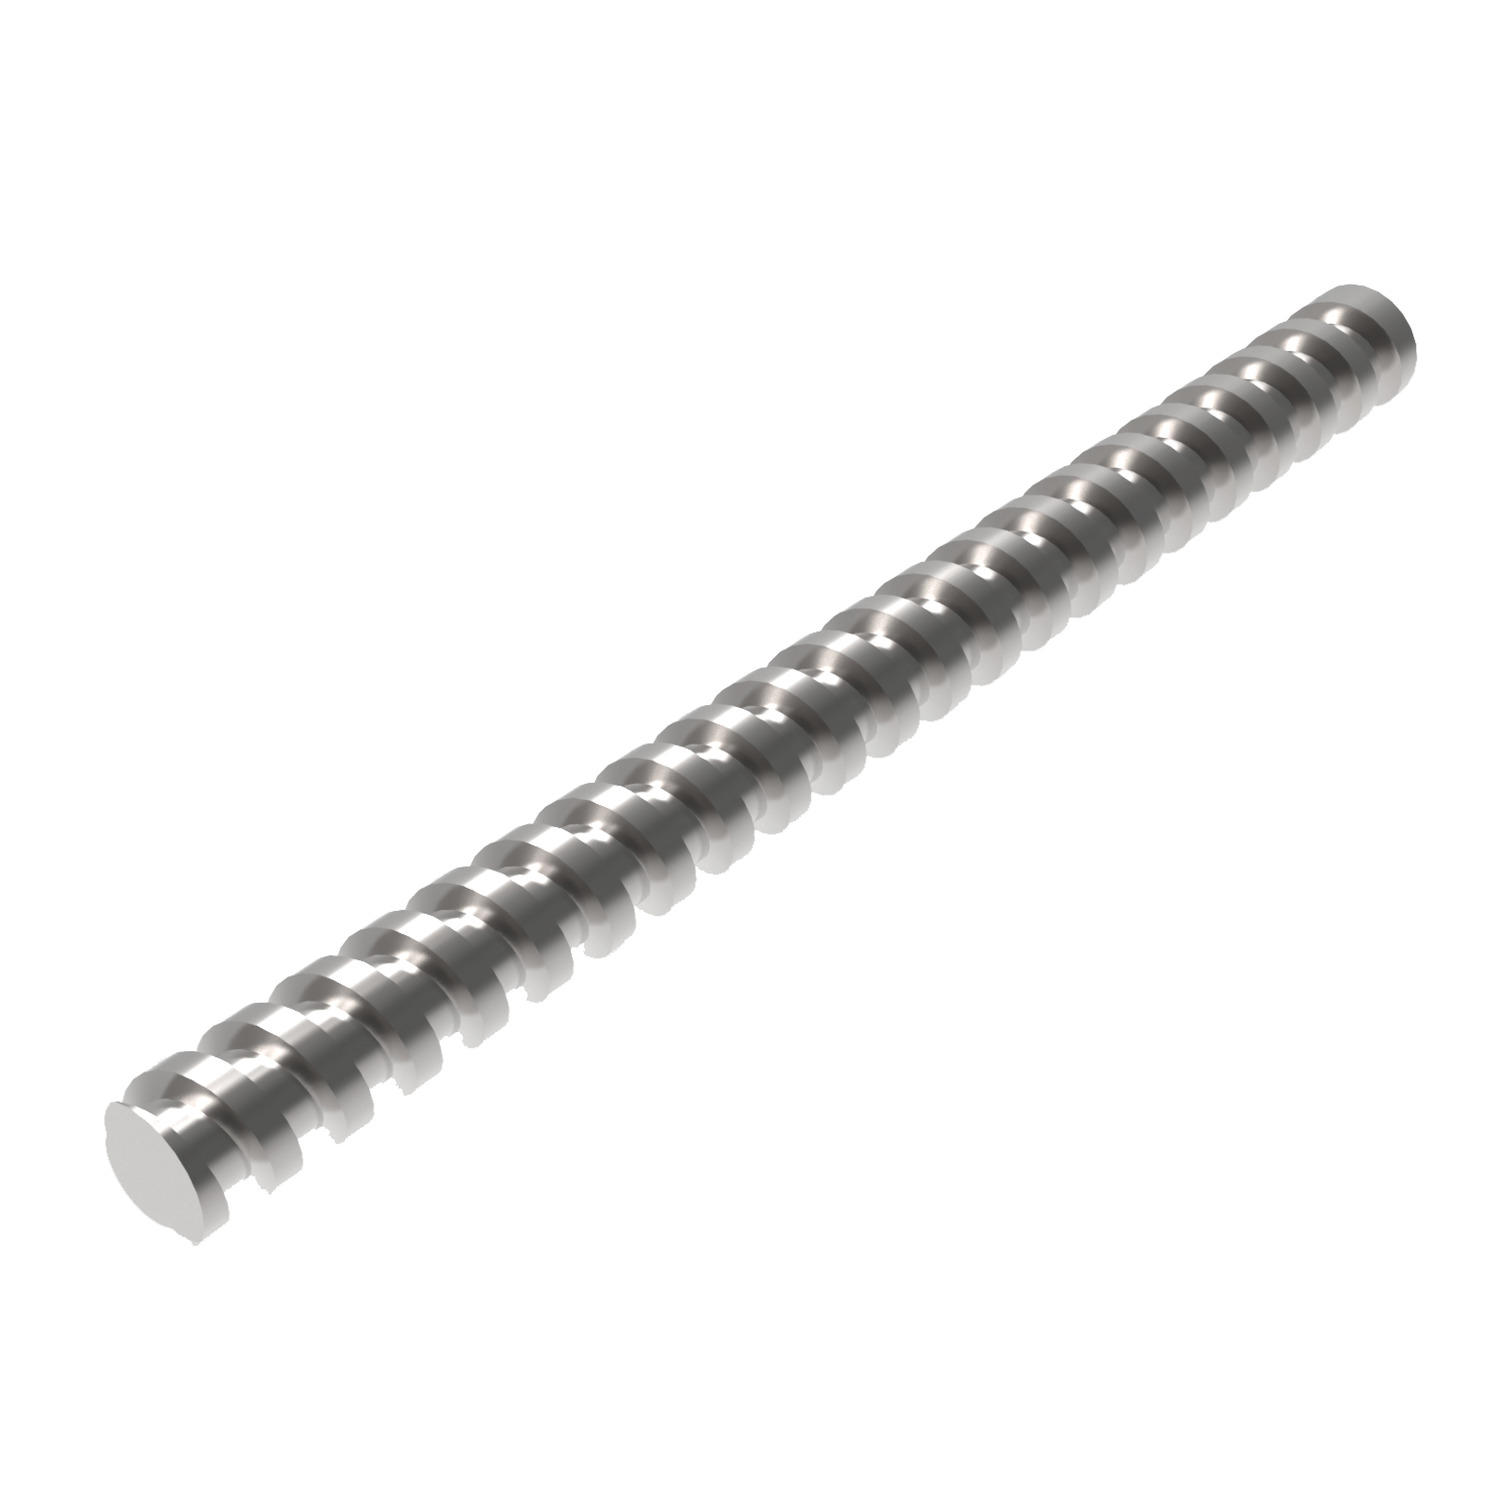 Ball Screws Ball screws from 16 to 80mm diameter with a range of leads, normally supplied with flanged nuts or cylindrical nuts. We stock lengths of up to 3m but can cut to size/machine the screw ends on request.